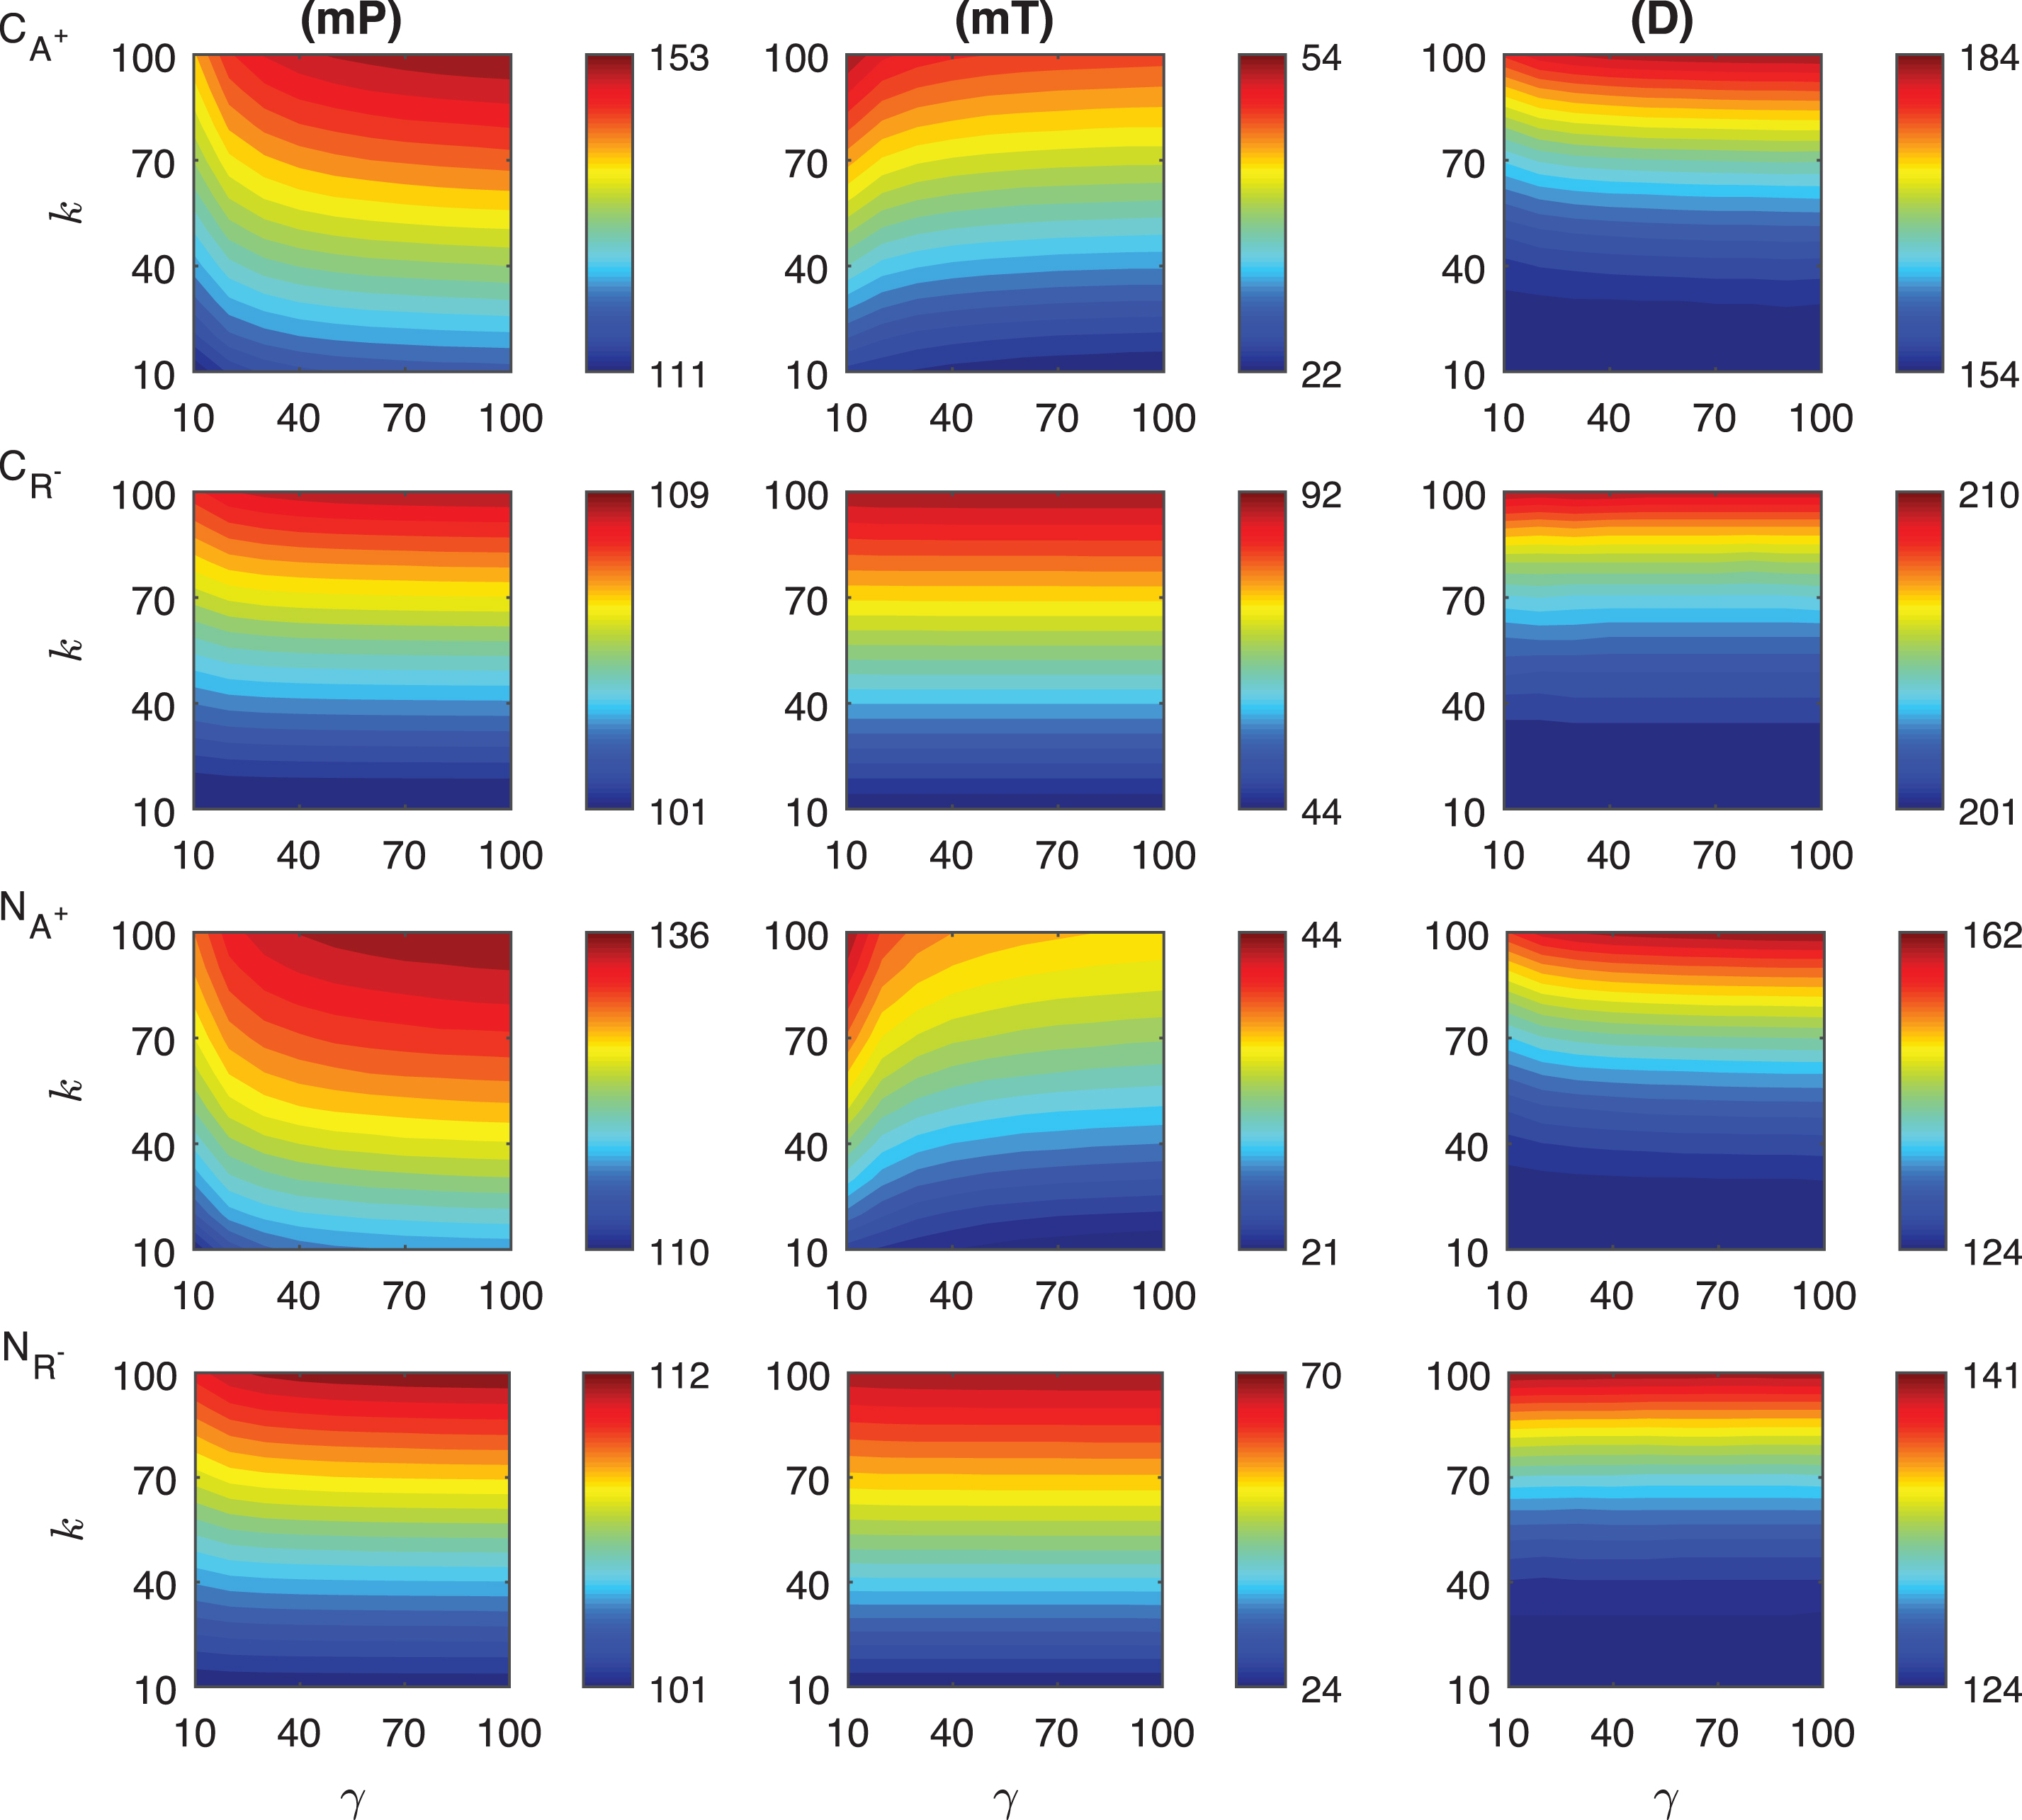 Heat maps for the comparison of three metrics (mid-protein level mP, time to reach mid-protein level mT and duration D) describing the dynamics of competitive (CA+, CR−) and noncompetitive (NA+, NR−) activation mechanisms. In these simulations, the signal amplitude γ and persistency k range from 10-fold to 100-fold change when ro = 10−4. All the other parameters were held constant at their values listed in Section 3. See text for details.